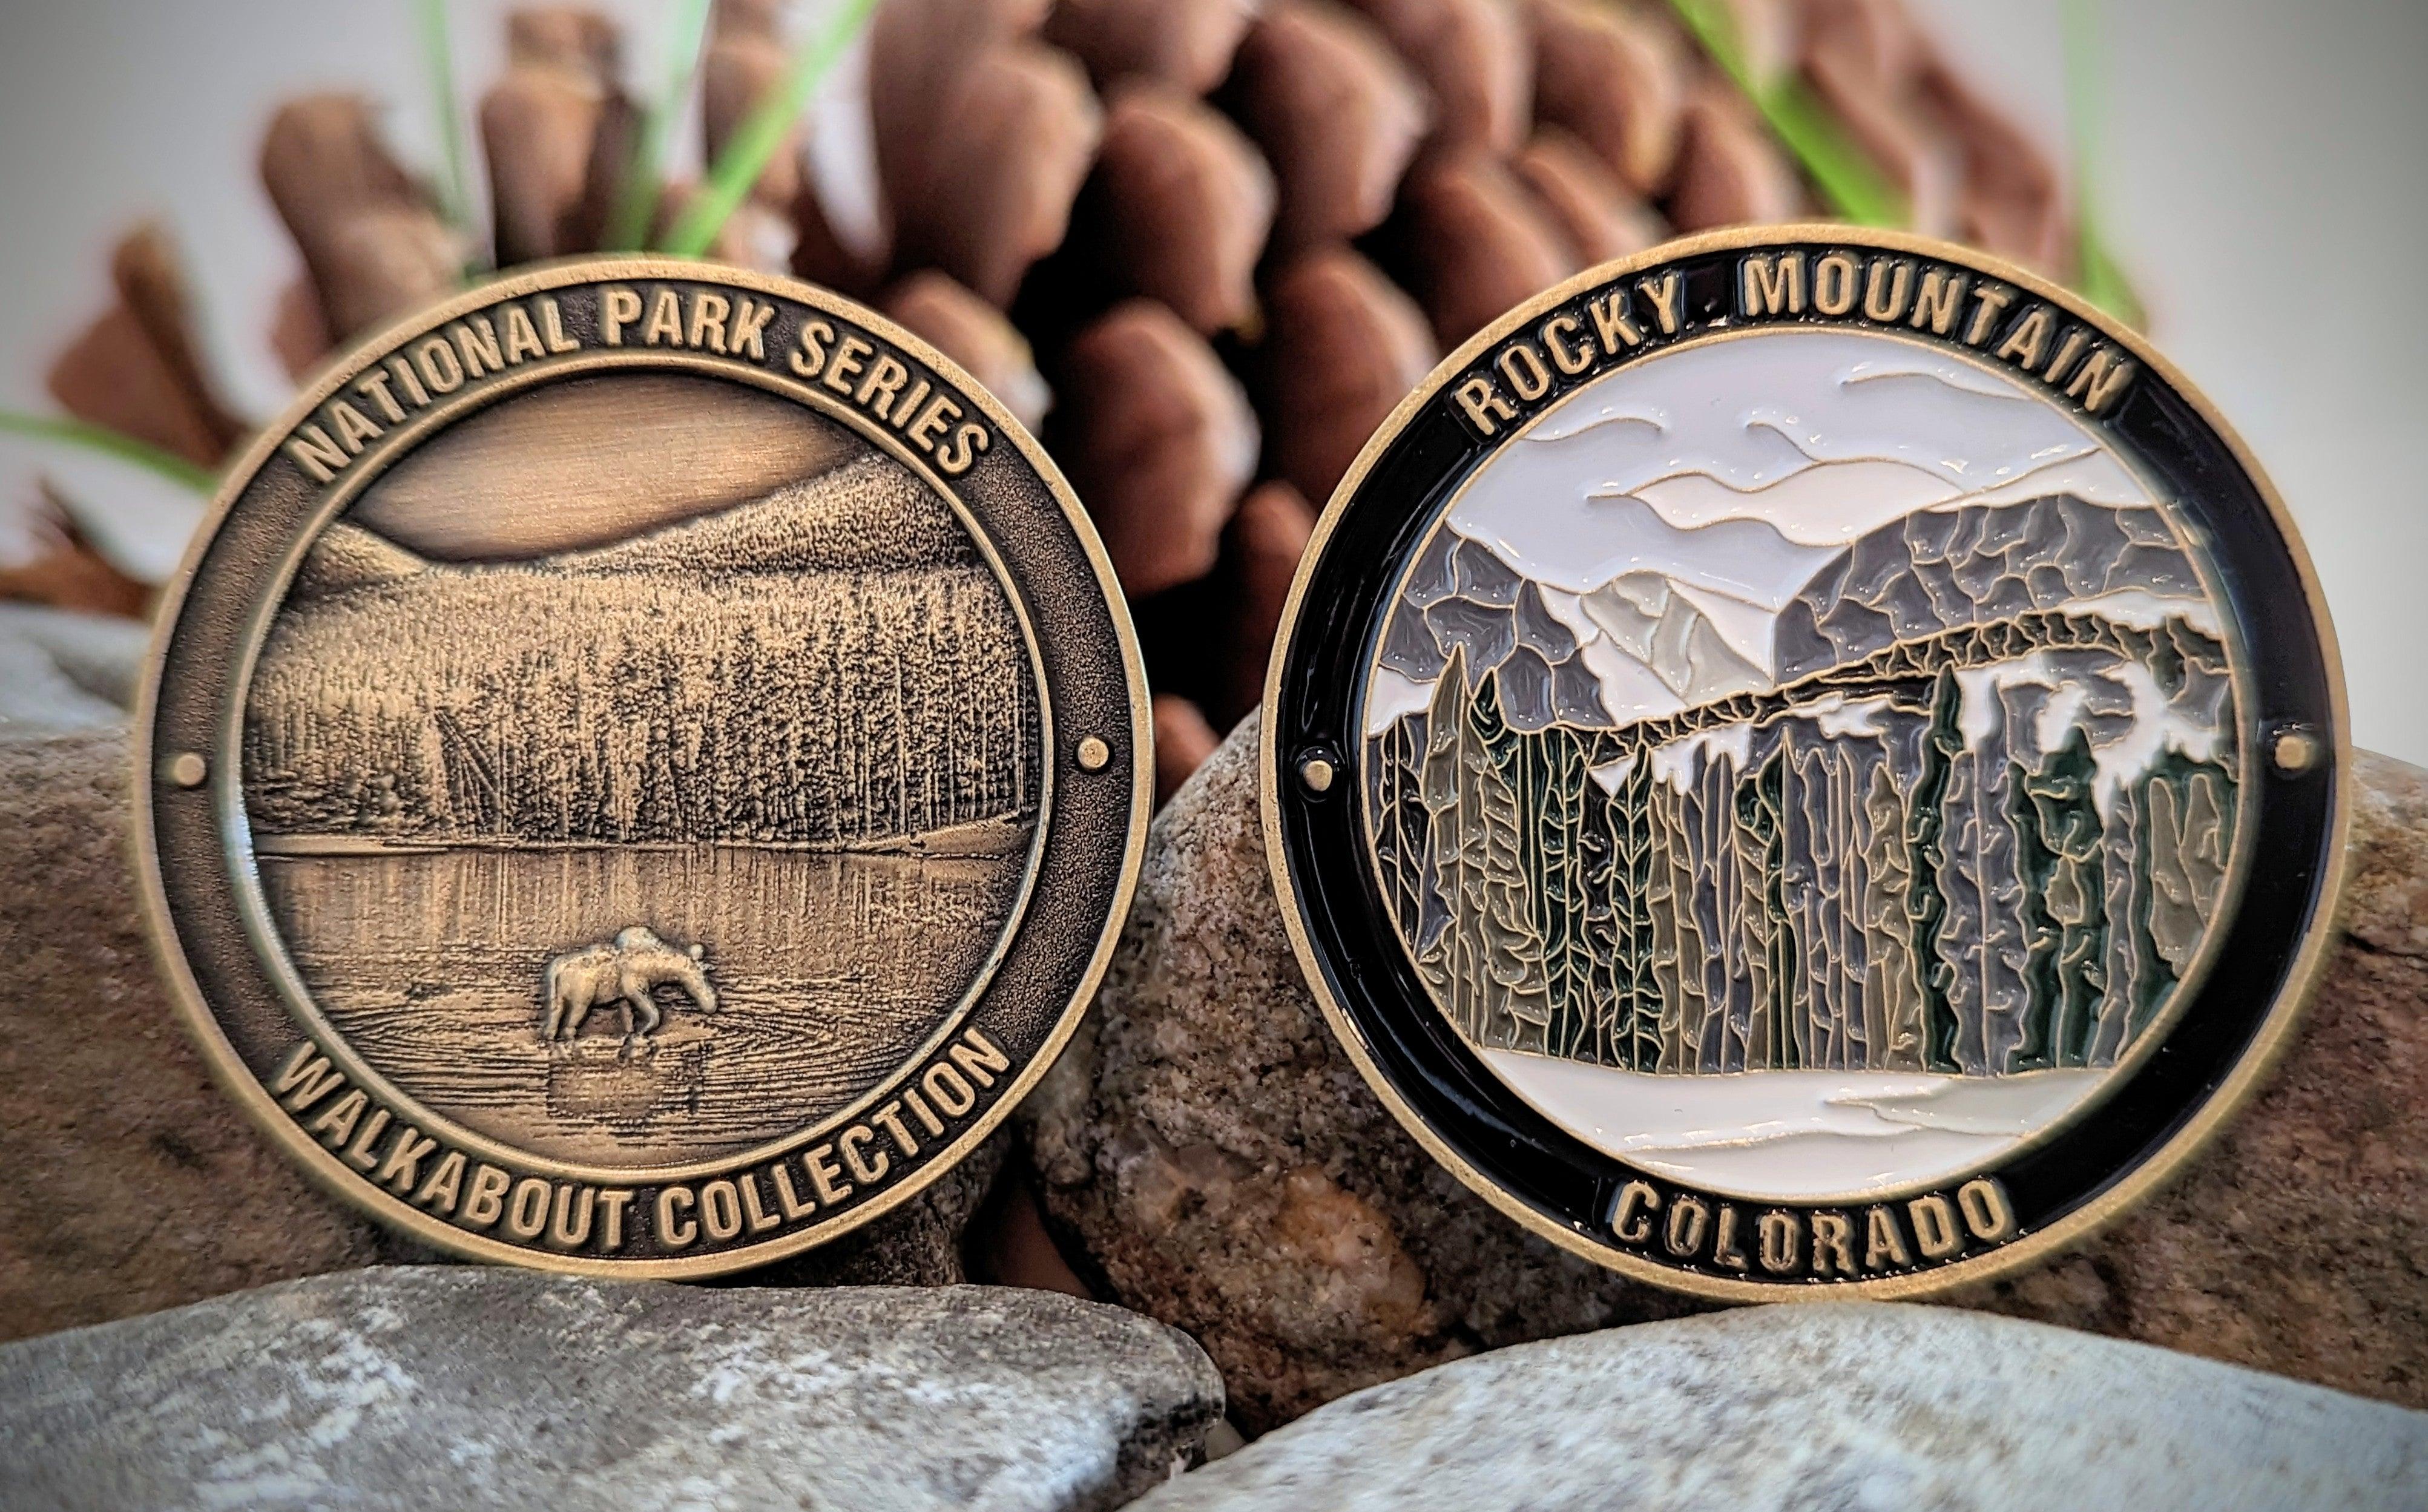 ROCKY MOUNTAIN NATIONAL PARK CHALLENGE COIN - www.unidentalce.com.br